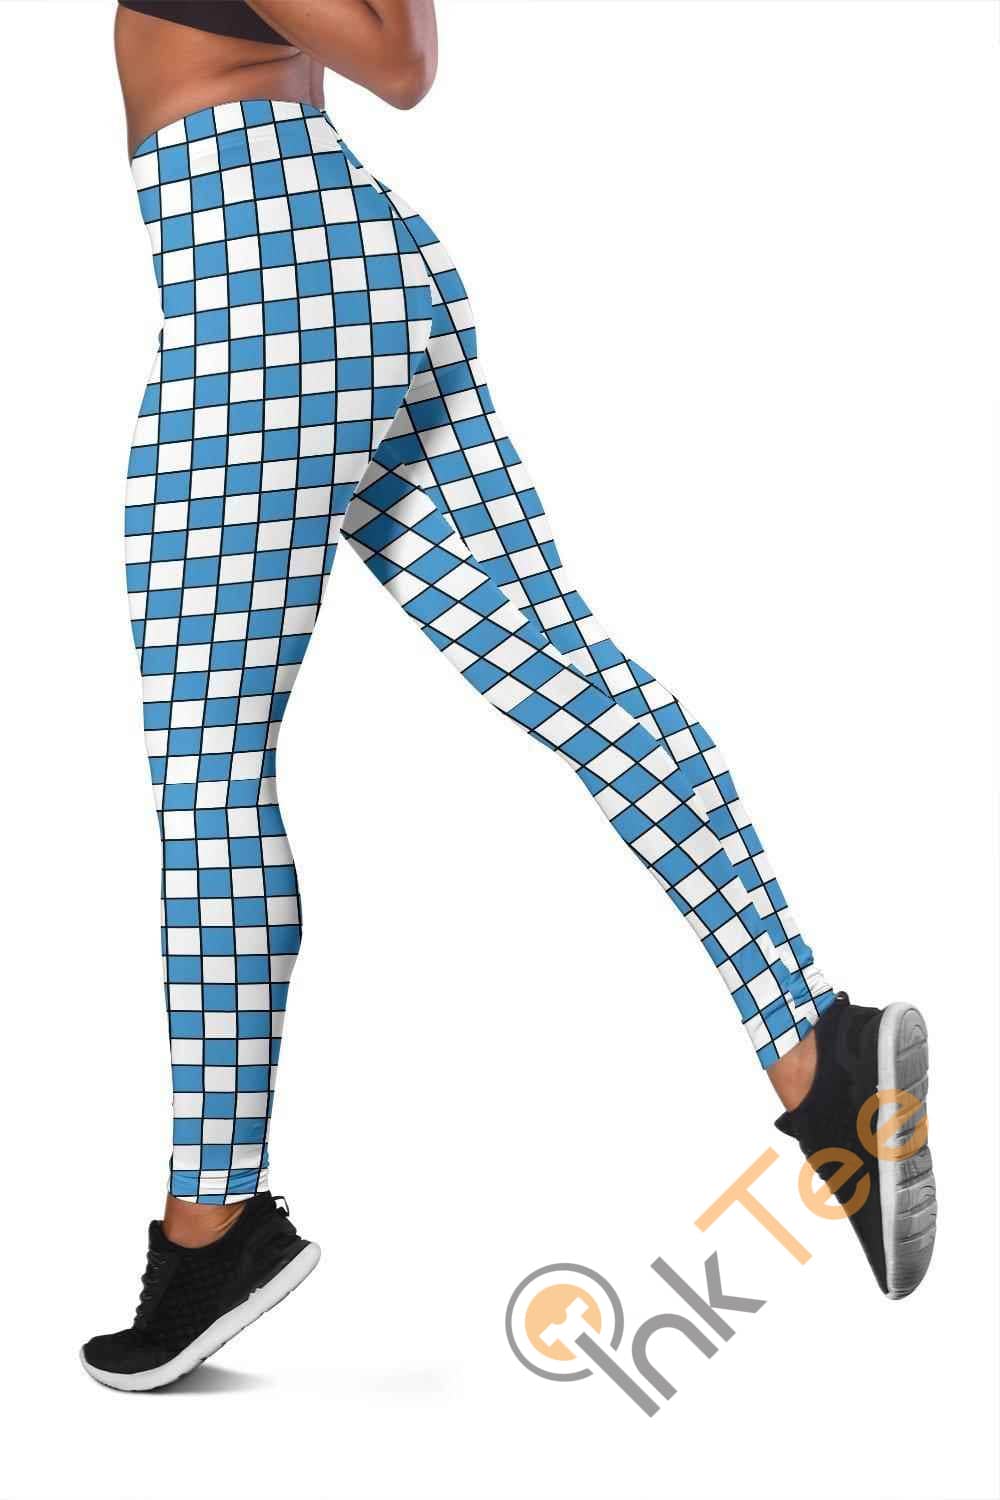 Inktee Store - North Carolina Tar Heels Fan Inspired 3D All Over Print For Yoga Fitness Checkers Women'S Leggings Image